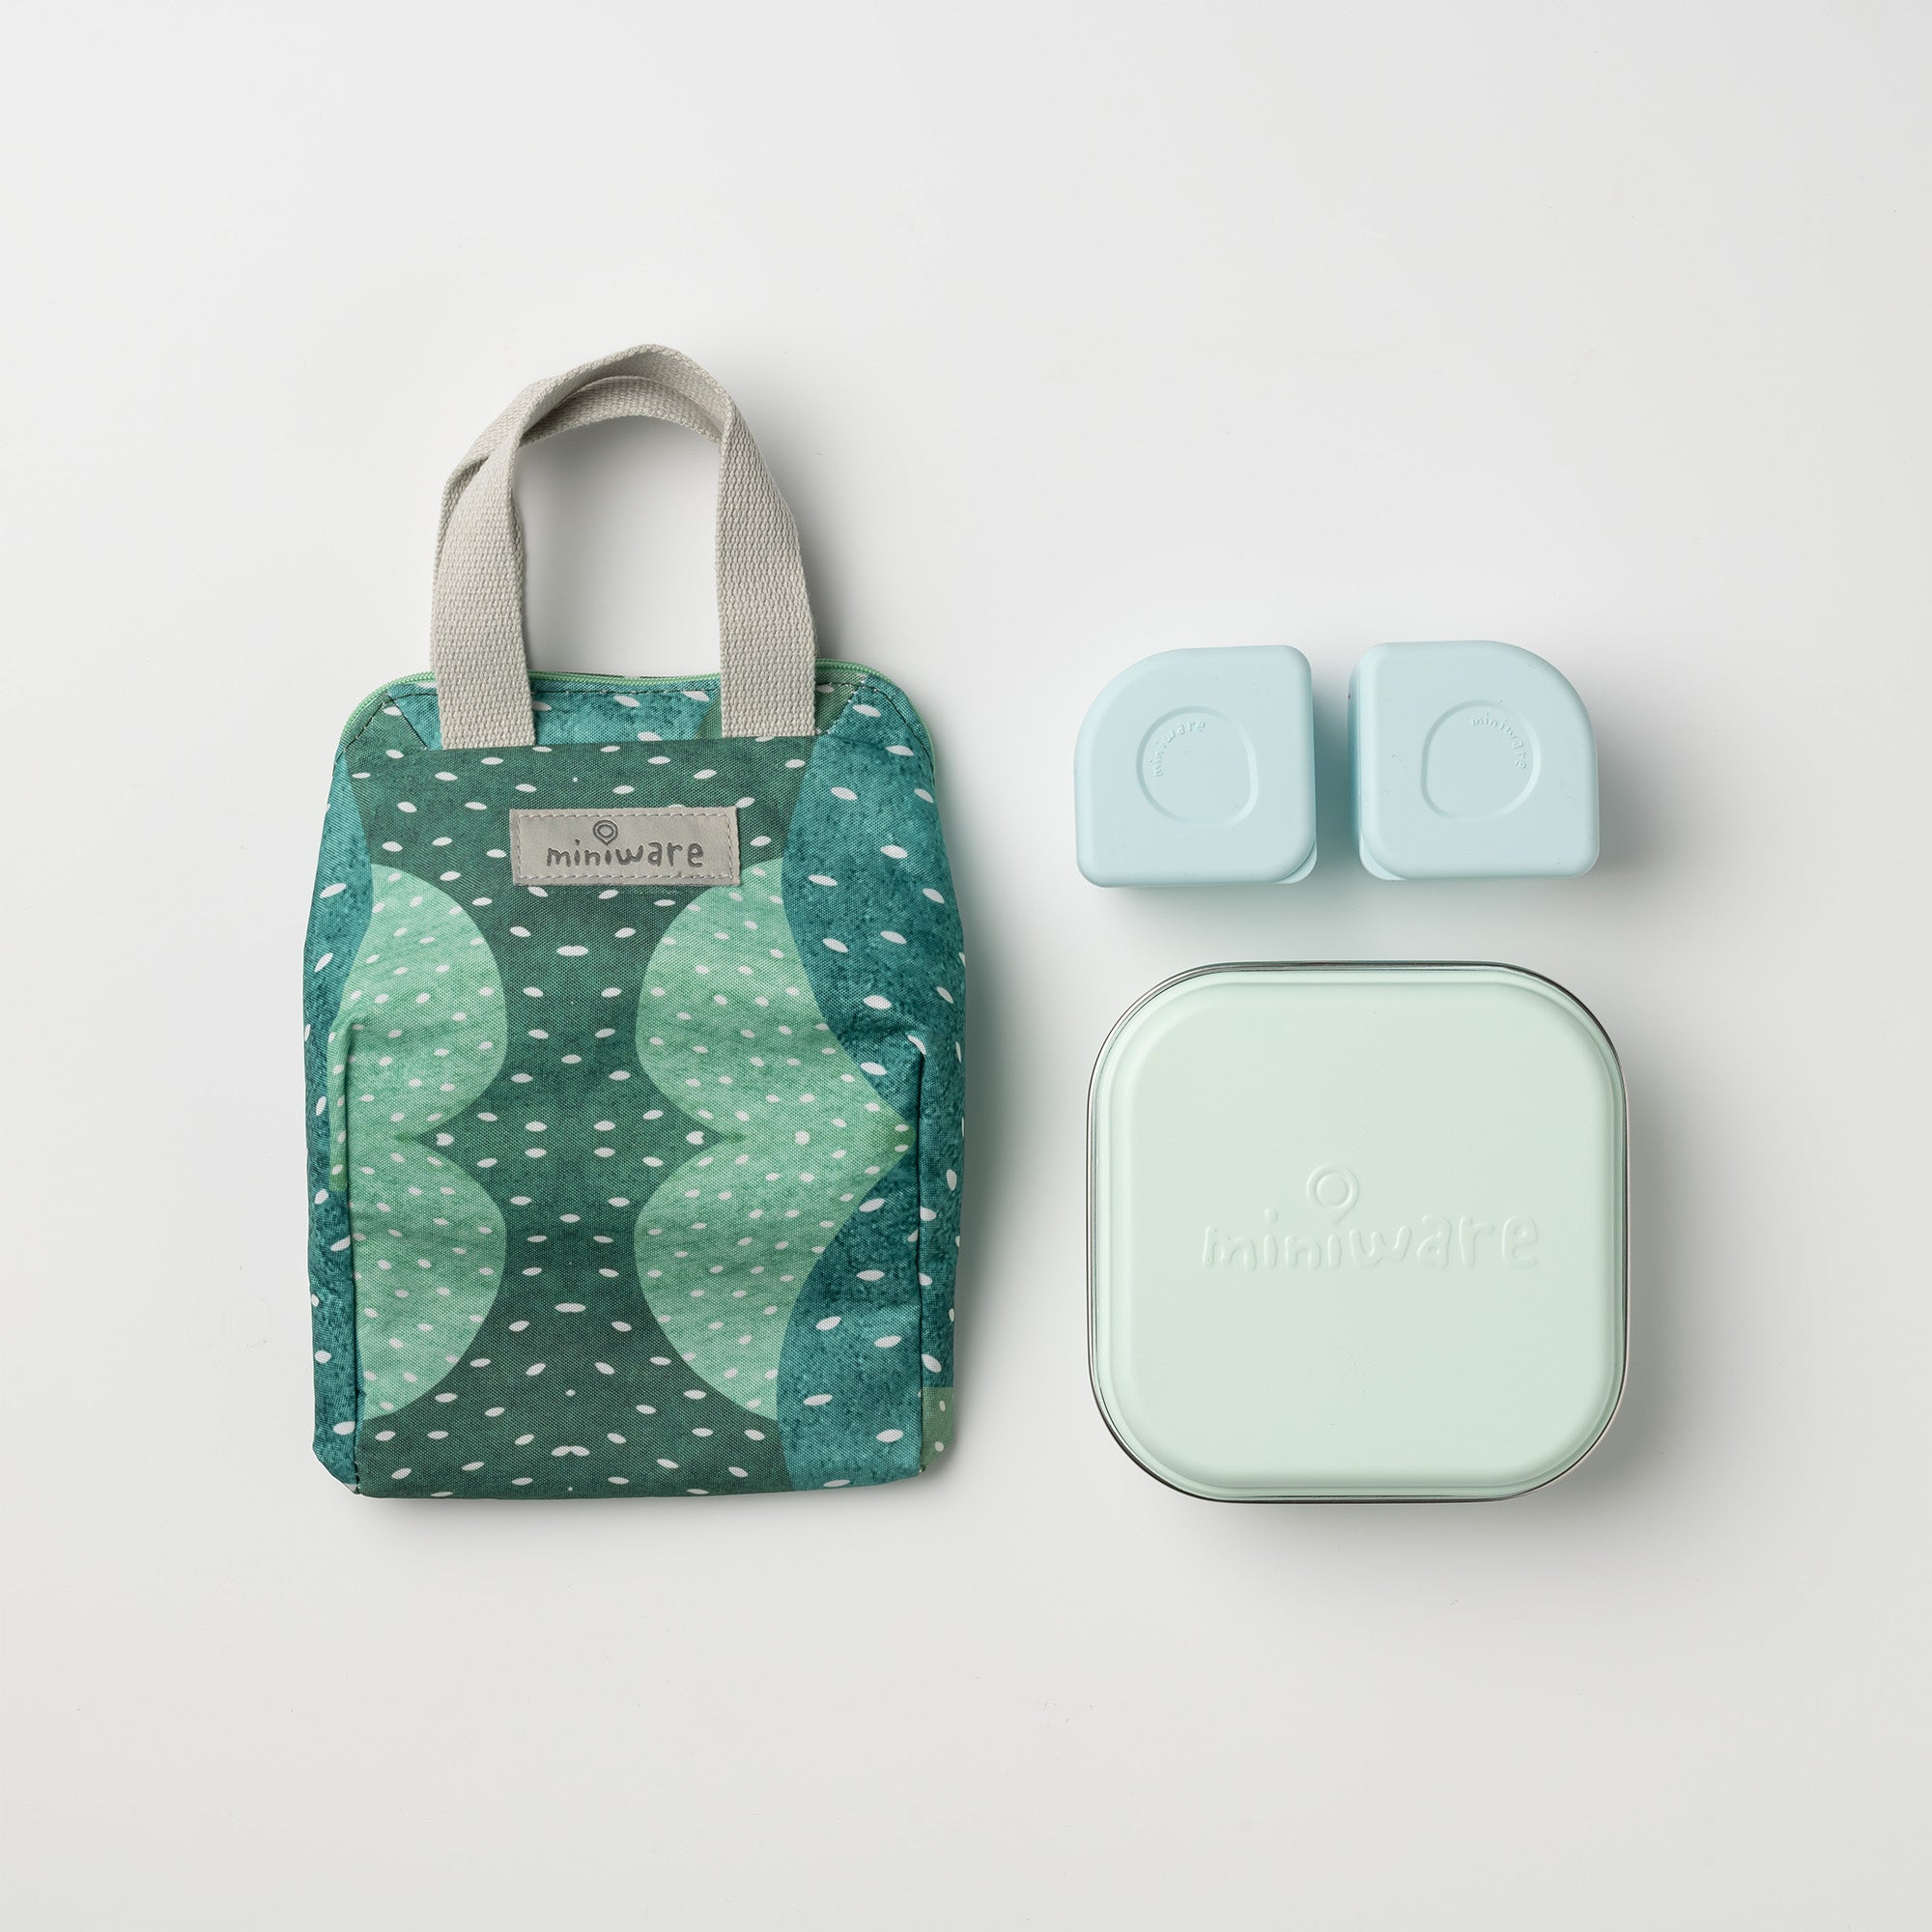 Miniware Ready Go! Bento & Lunch Bag Set, 3 Colors on Food52